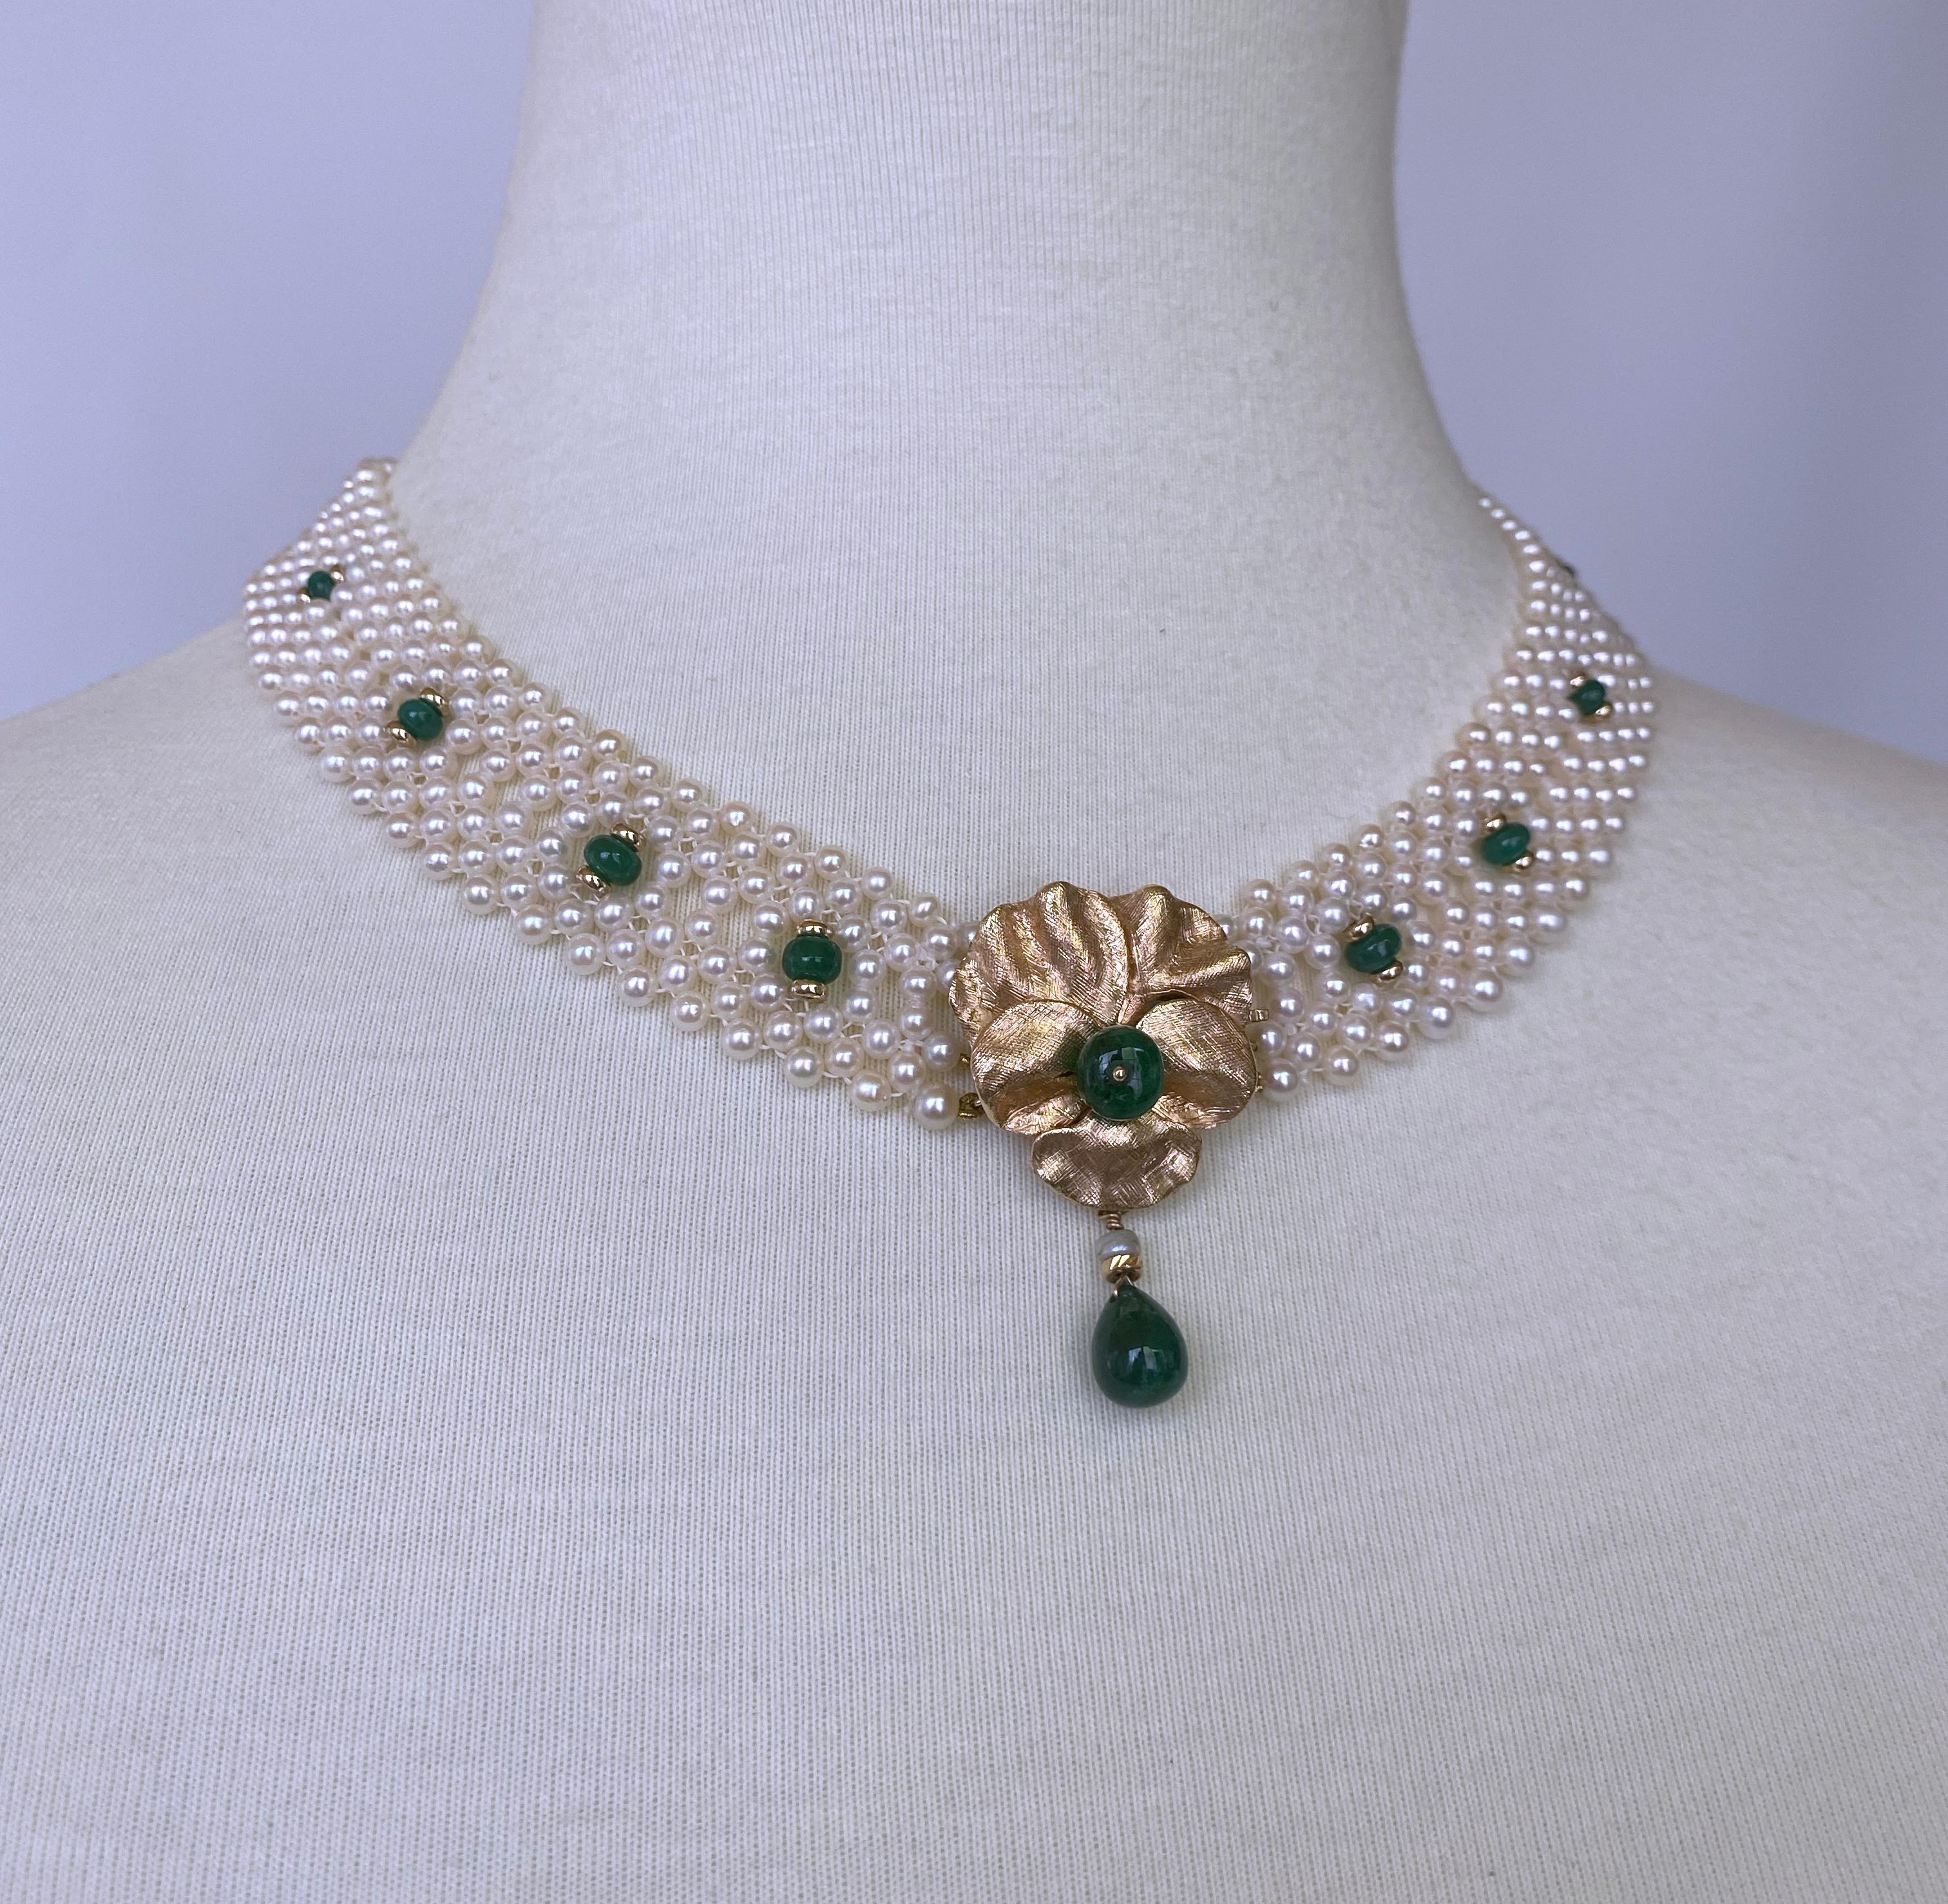 Marina J Woven Pearl & Emerald Infinity Necklace with Vintage 14k Centerpiece 1